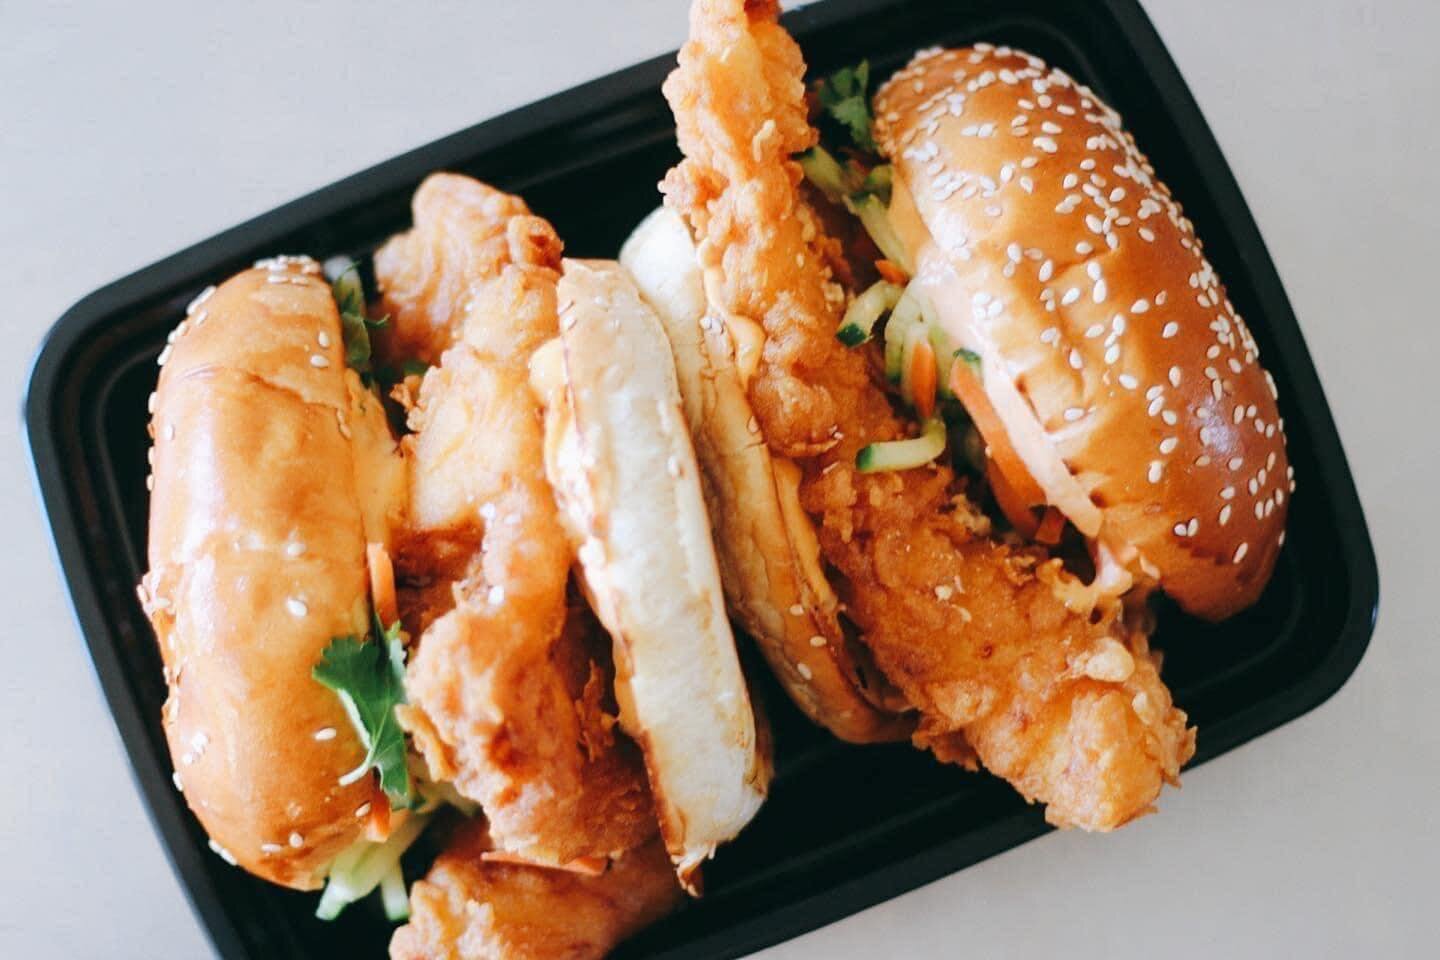 FISH FRY FRIDAY 04/05:  This week, we&rsquo;ve got three fried haddock sandwiches for you to choose from. &quot;The Banh Mi&quot; starts with a golden-fried haddock fillet, topped with a cucumber, carrot, and daikon slaw, fresh cilantro, then scatter